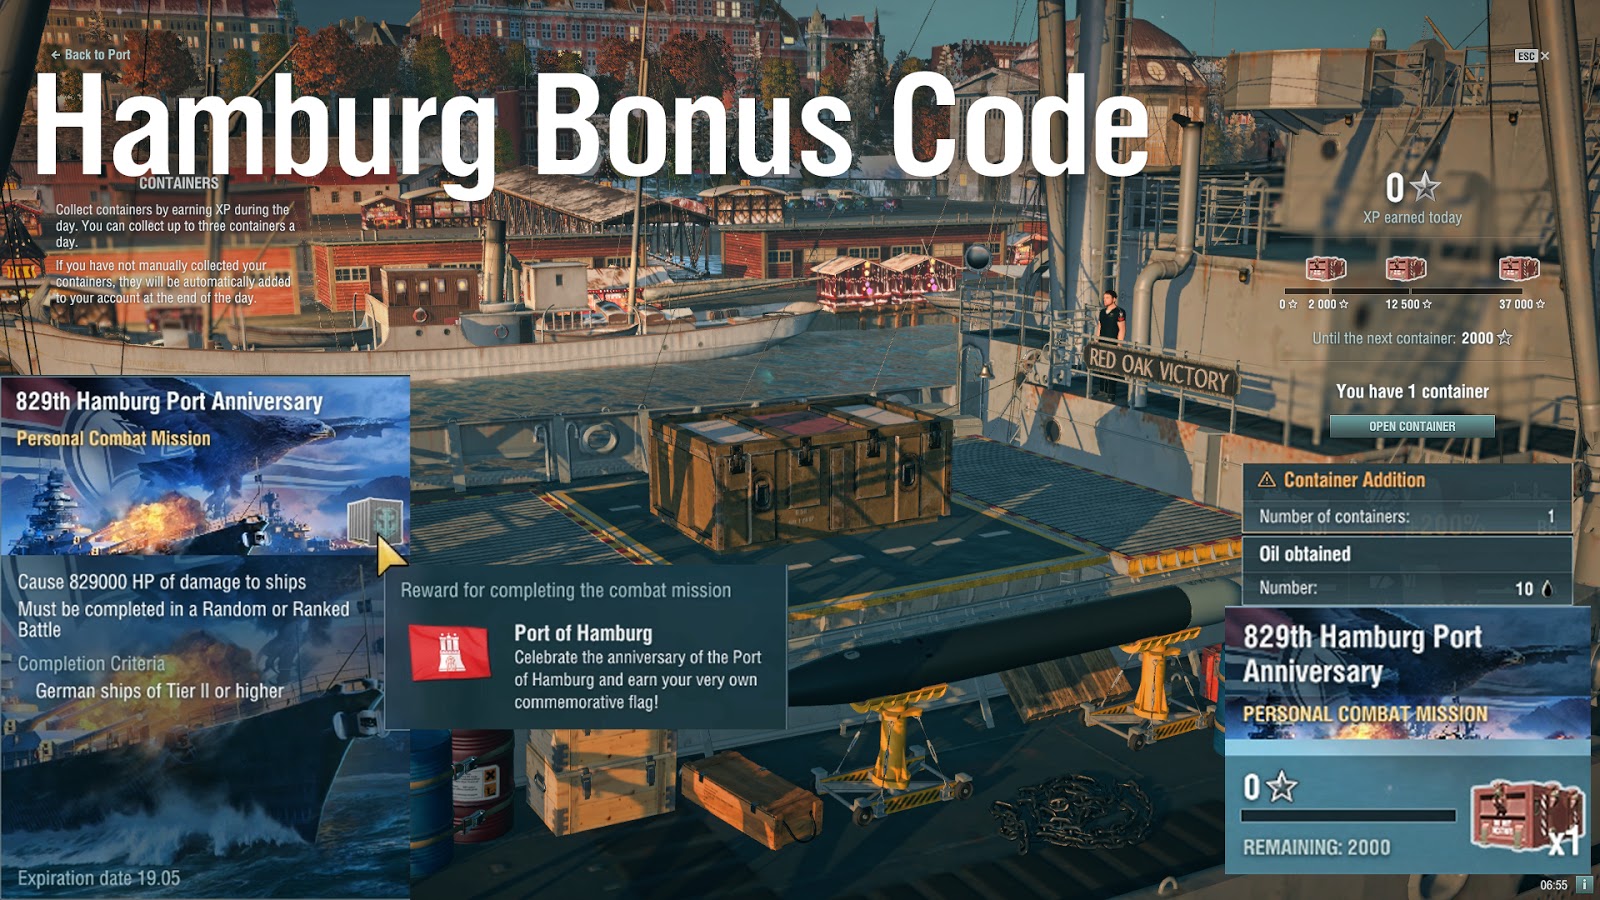 world of warships how to redeem code in steam